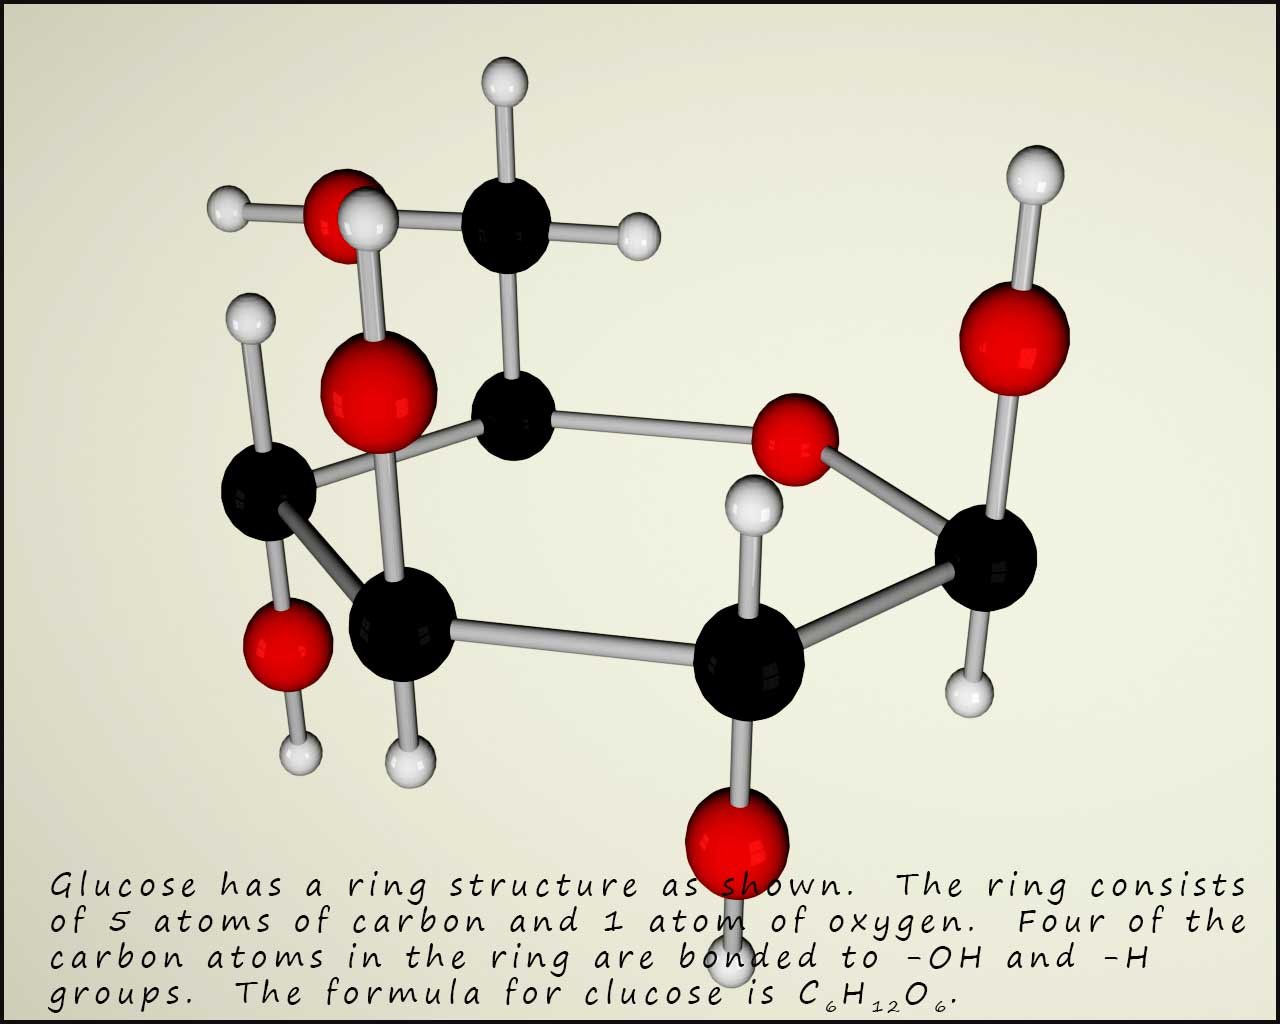 3d model showing the structure of glucose.